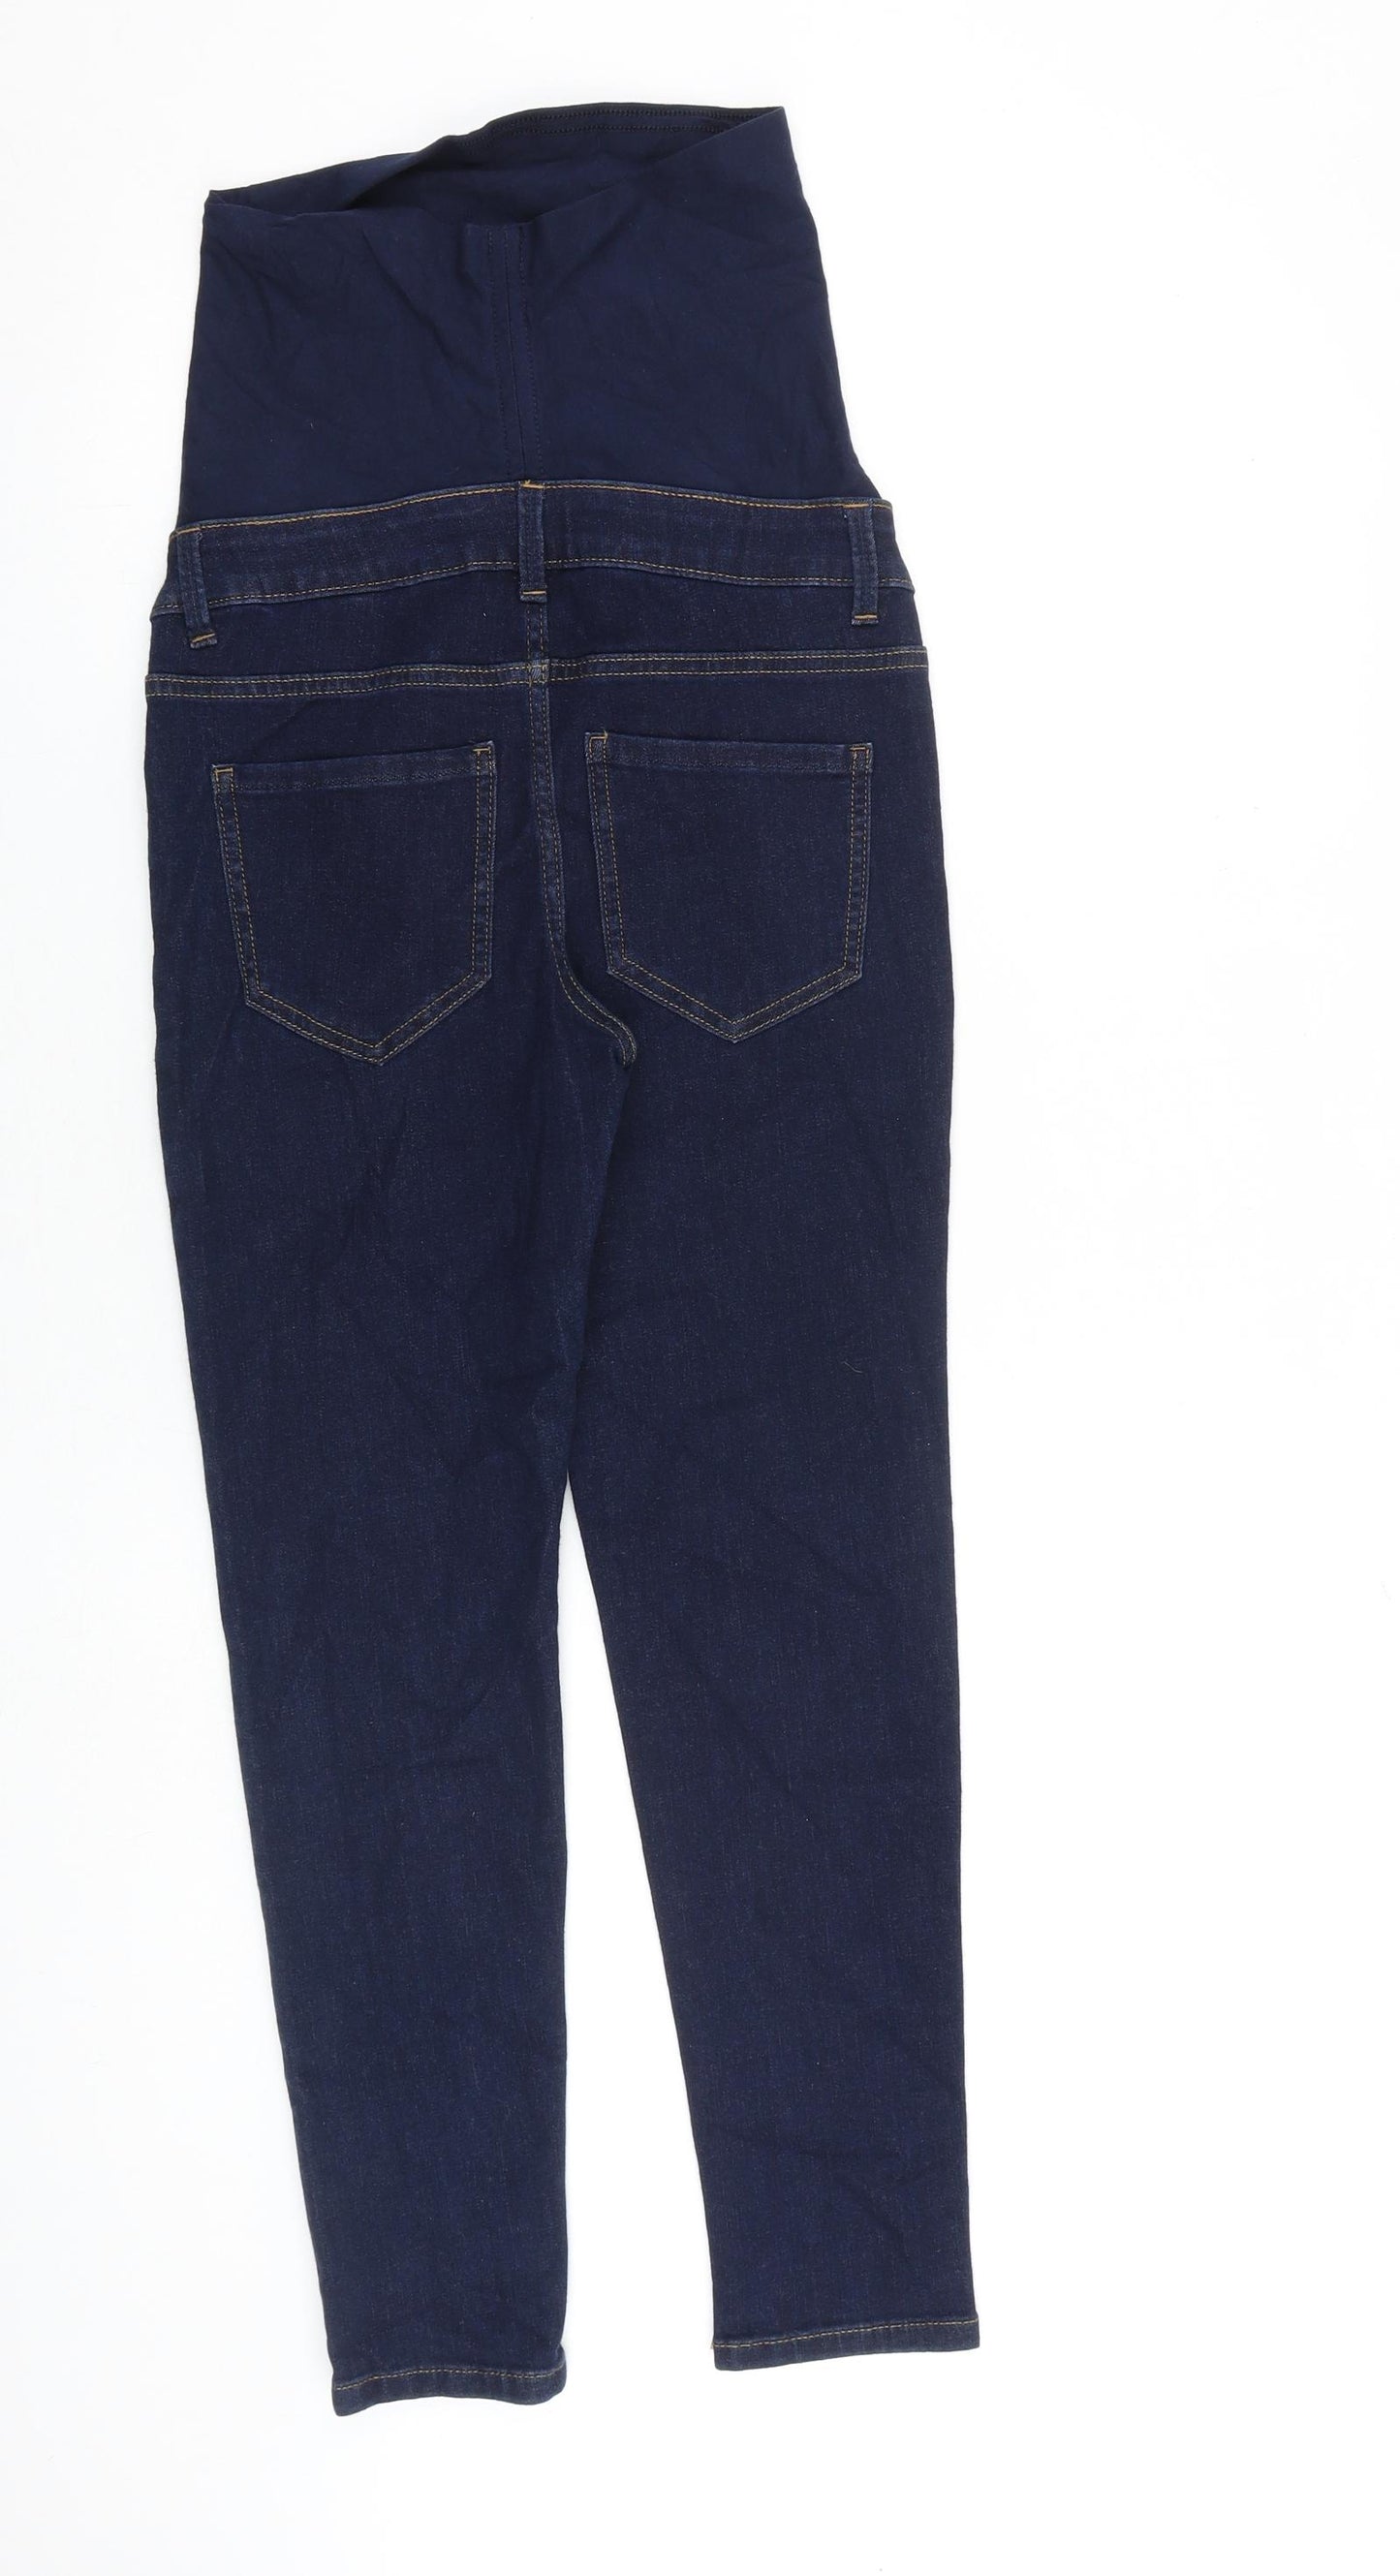 Marks and Spencer Womens Blue Cotton Skinny Jeans Size 6 L26 in Regular Button - Petite